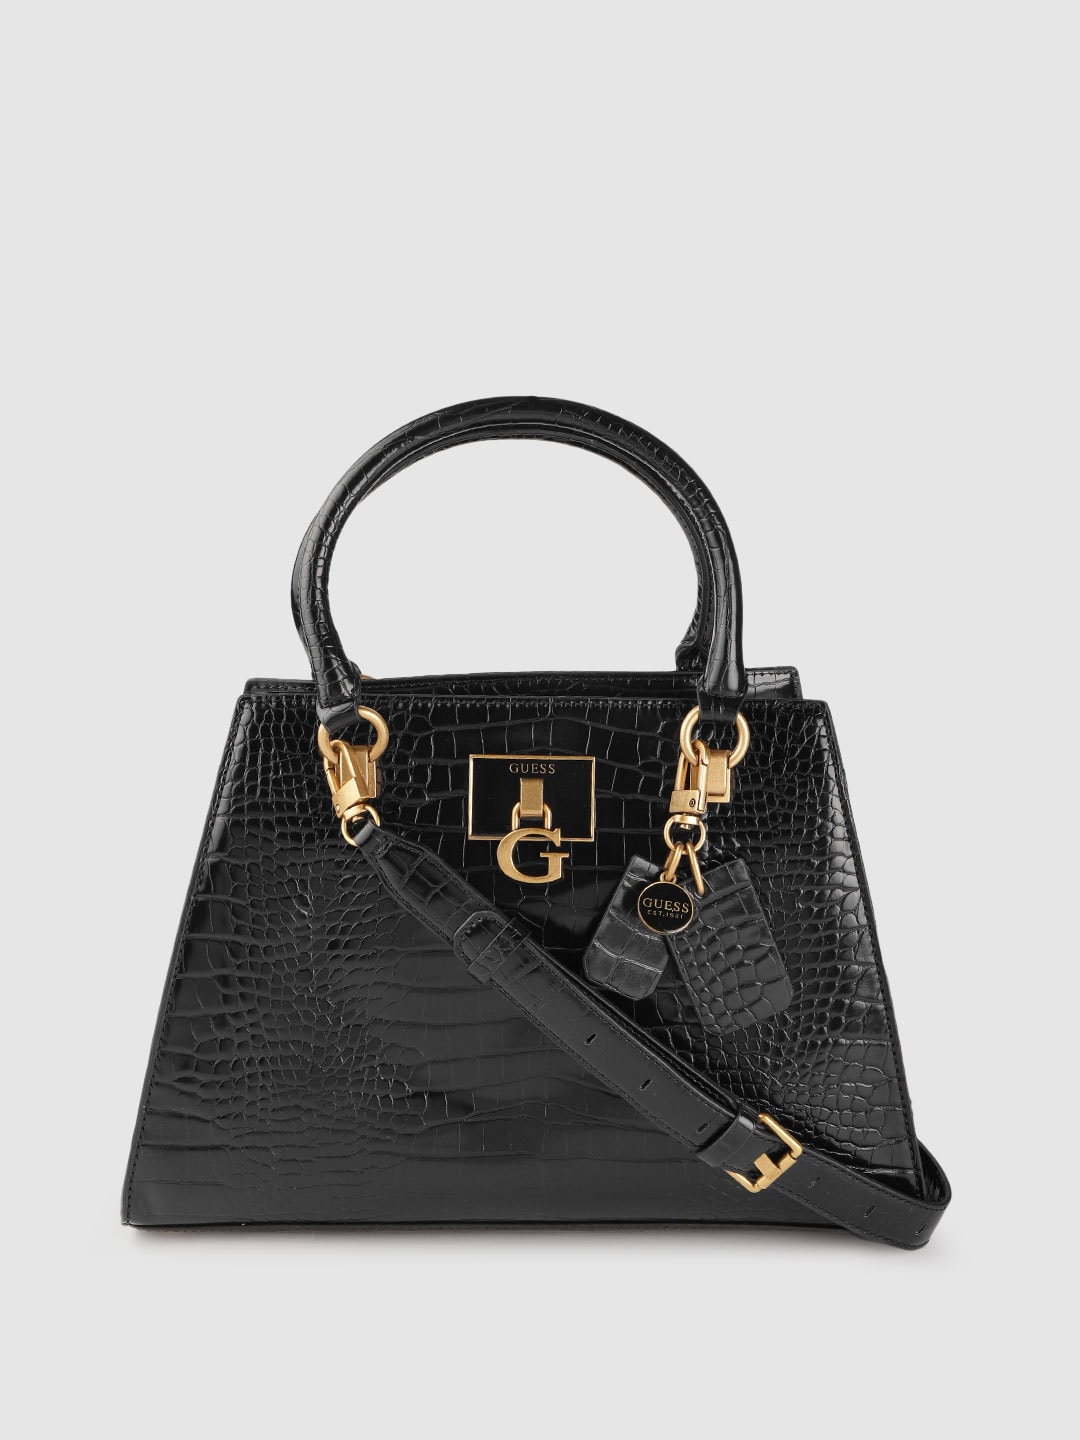 GUESS Women Black Crocs Textured Structured Handheld Bag Price in India